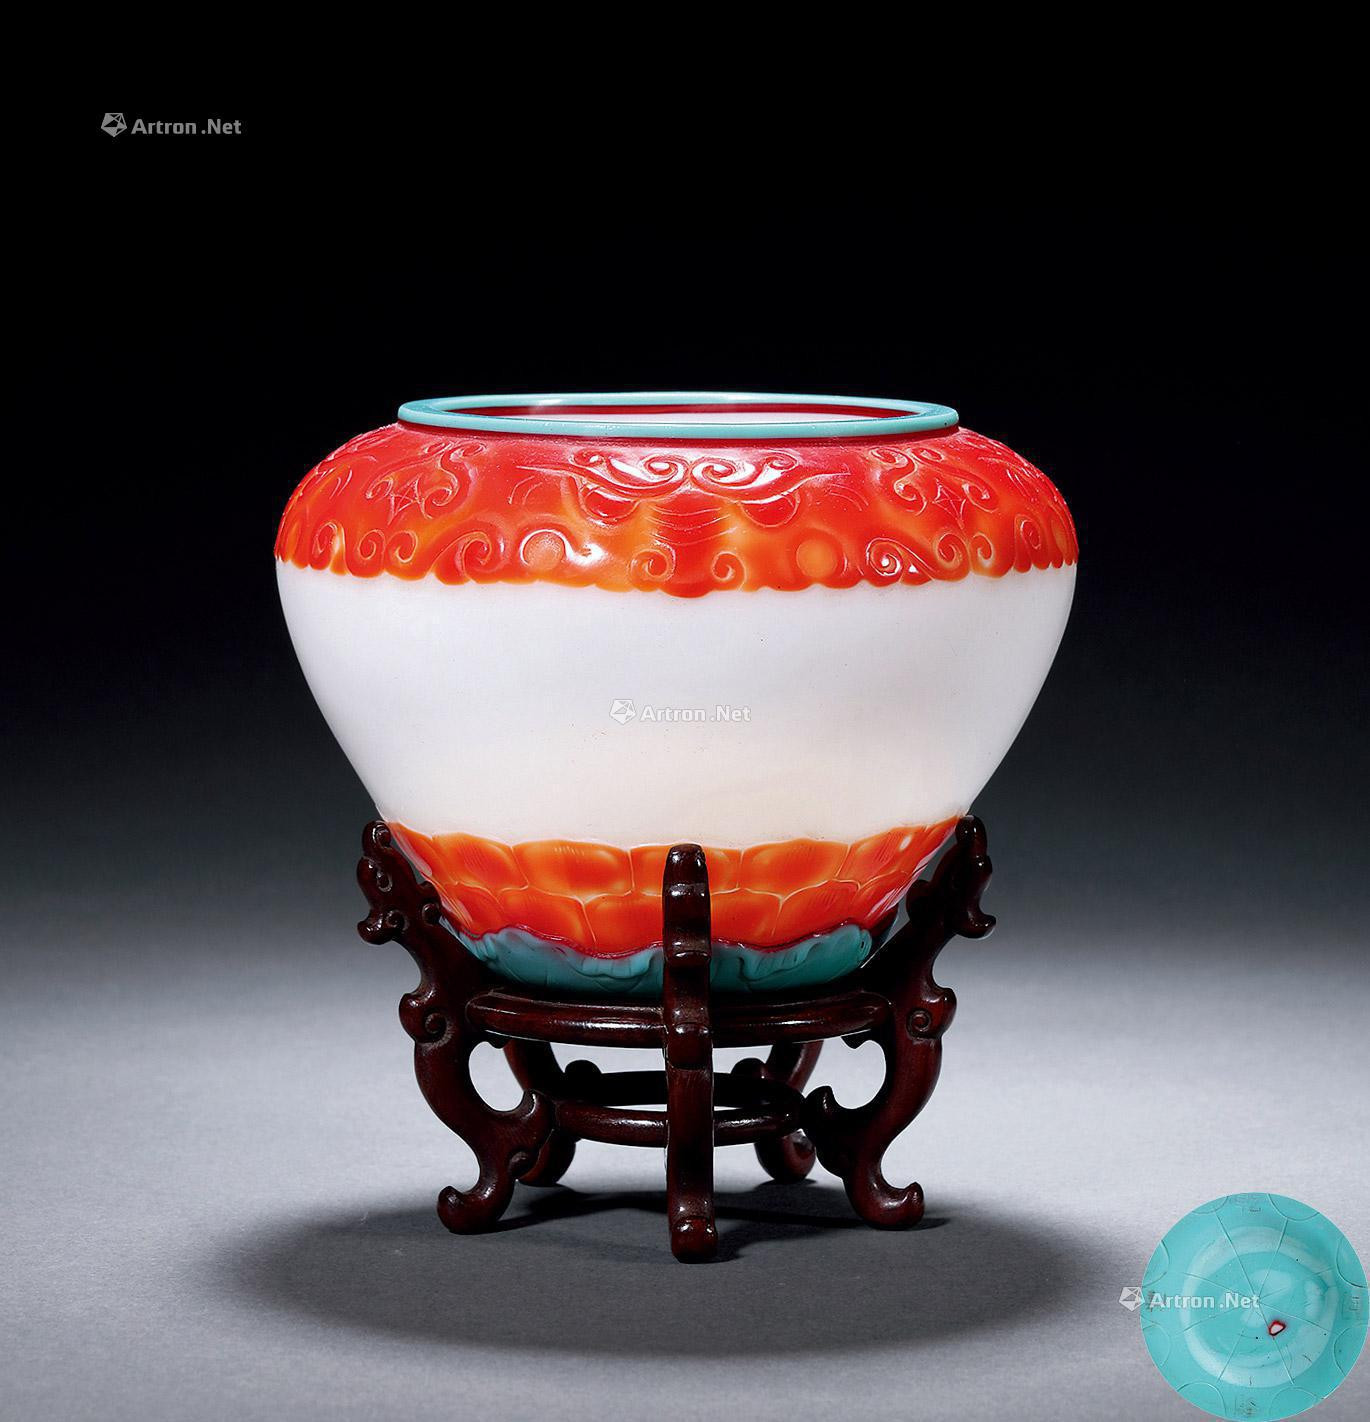 A SMALL glass BOWL WITH DESIGN OF LOTUS